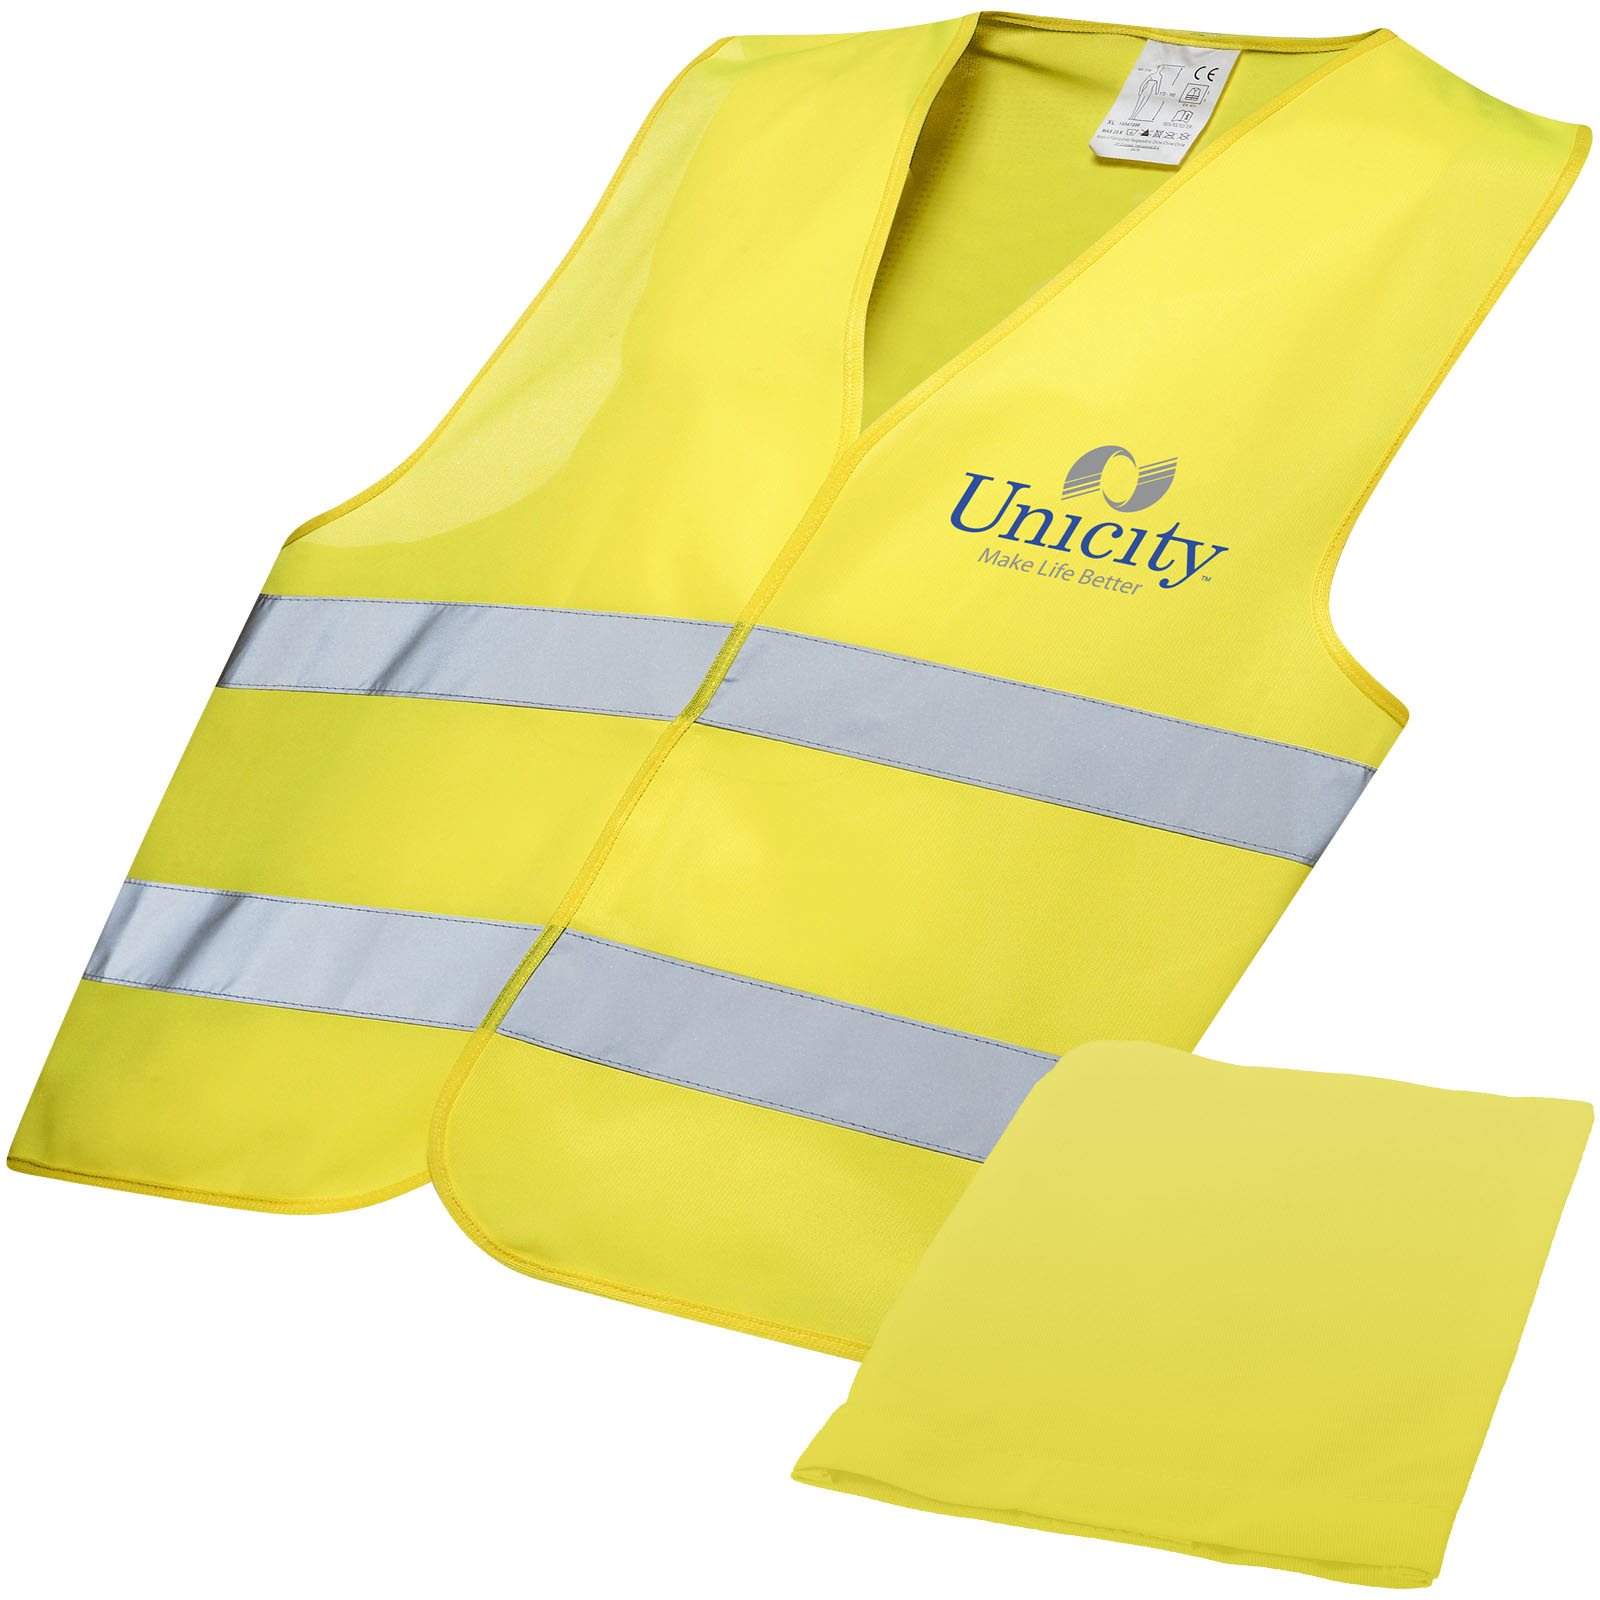 Safety Vests - RFX™ Watch-out XL safety vest in pouch for professional use